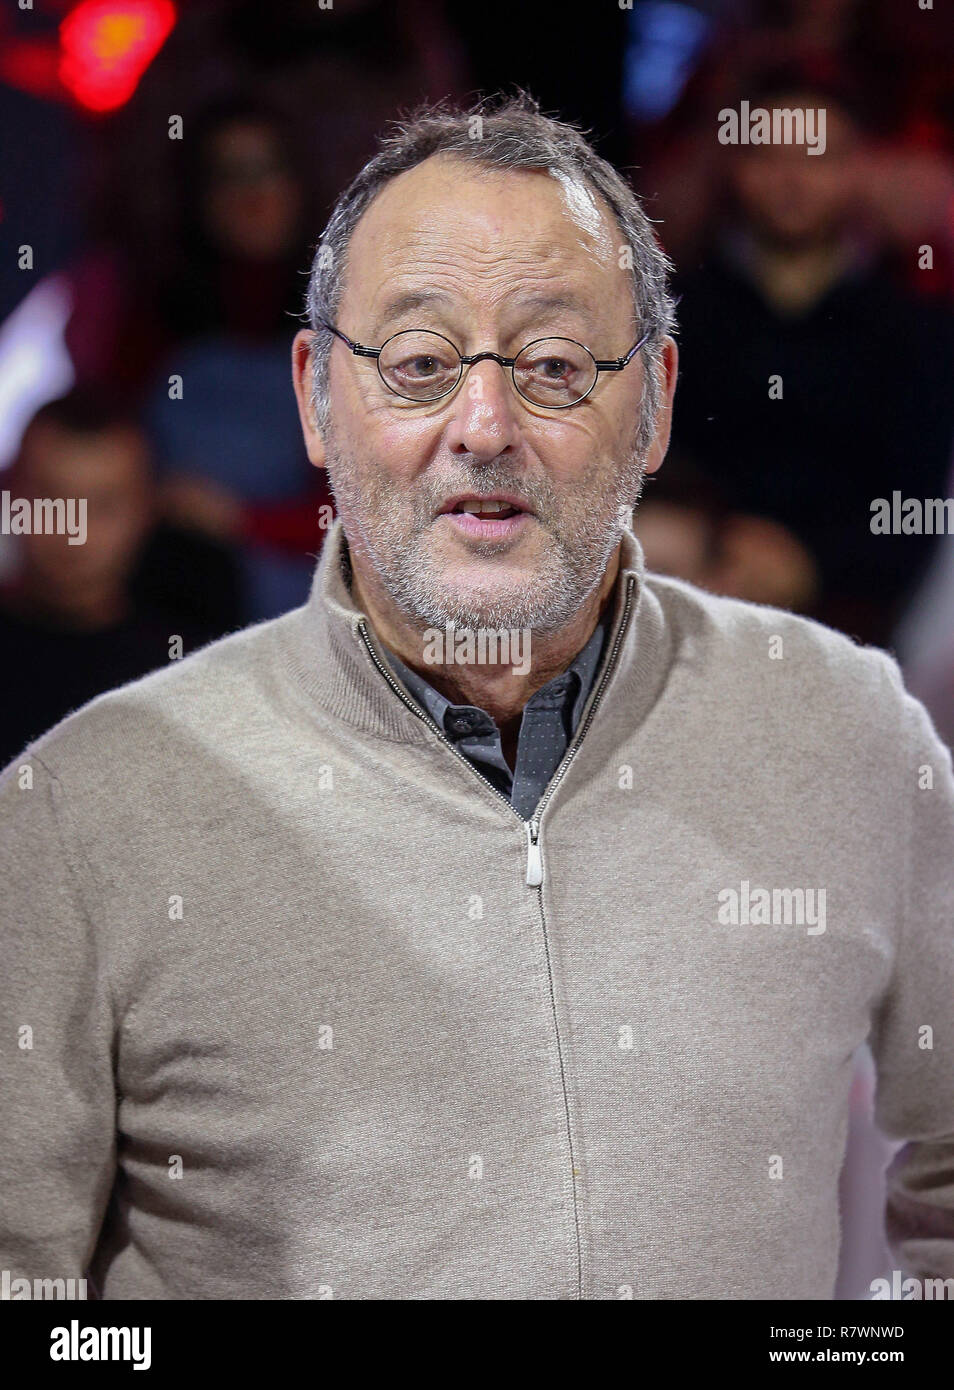 Jean Reno High Resolution Stock Photography and Images - Alamy